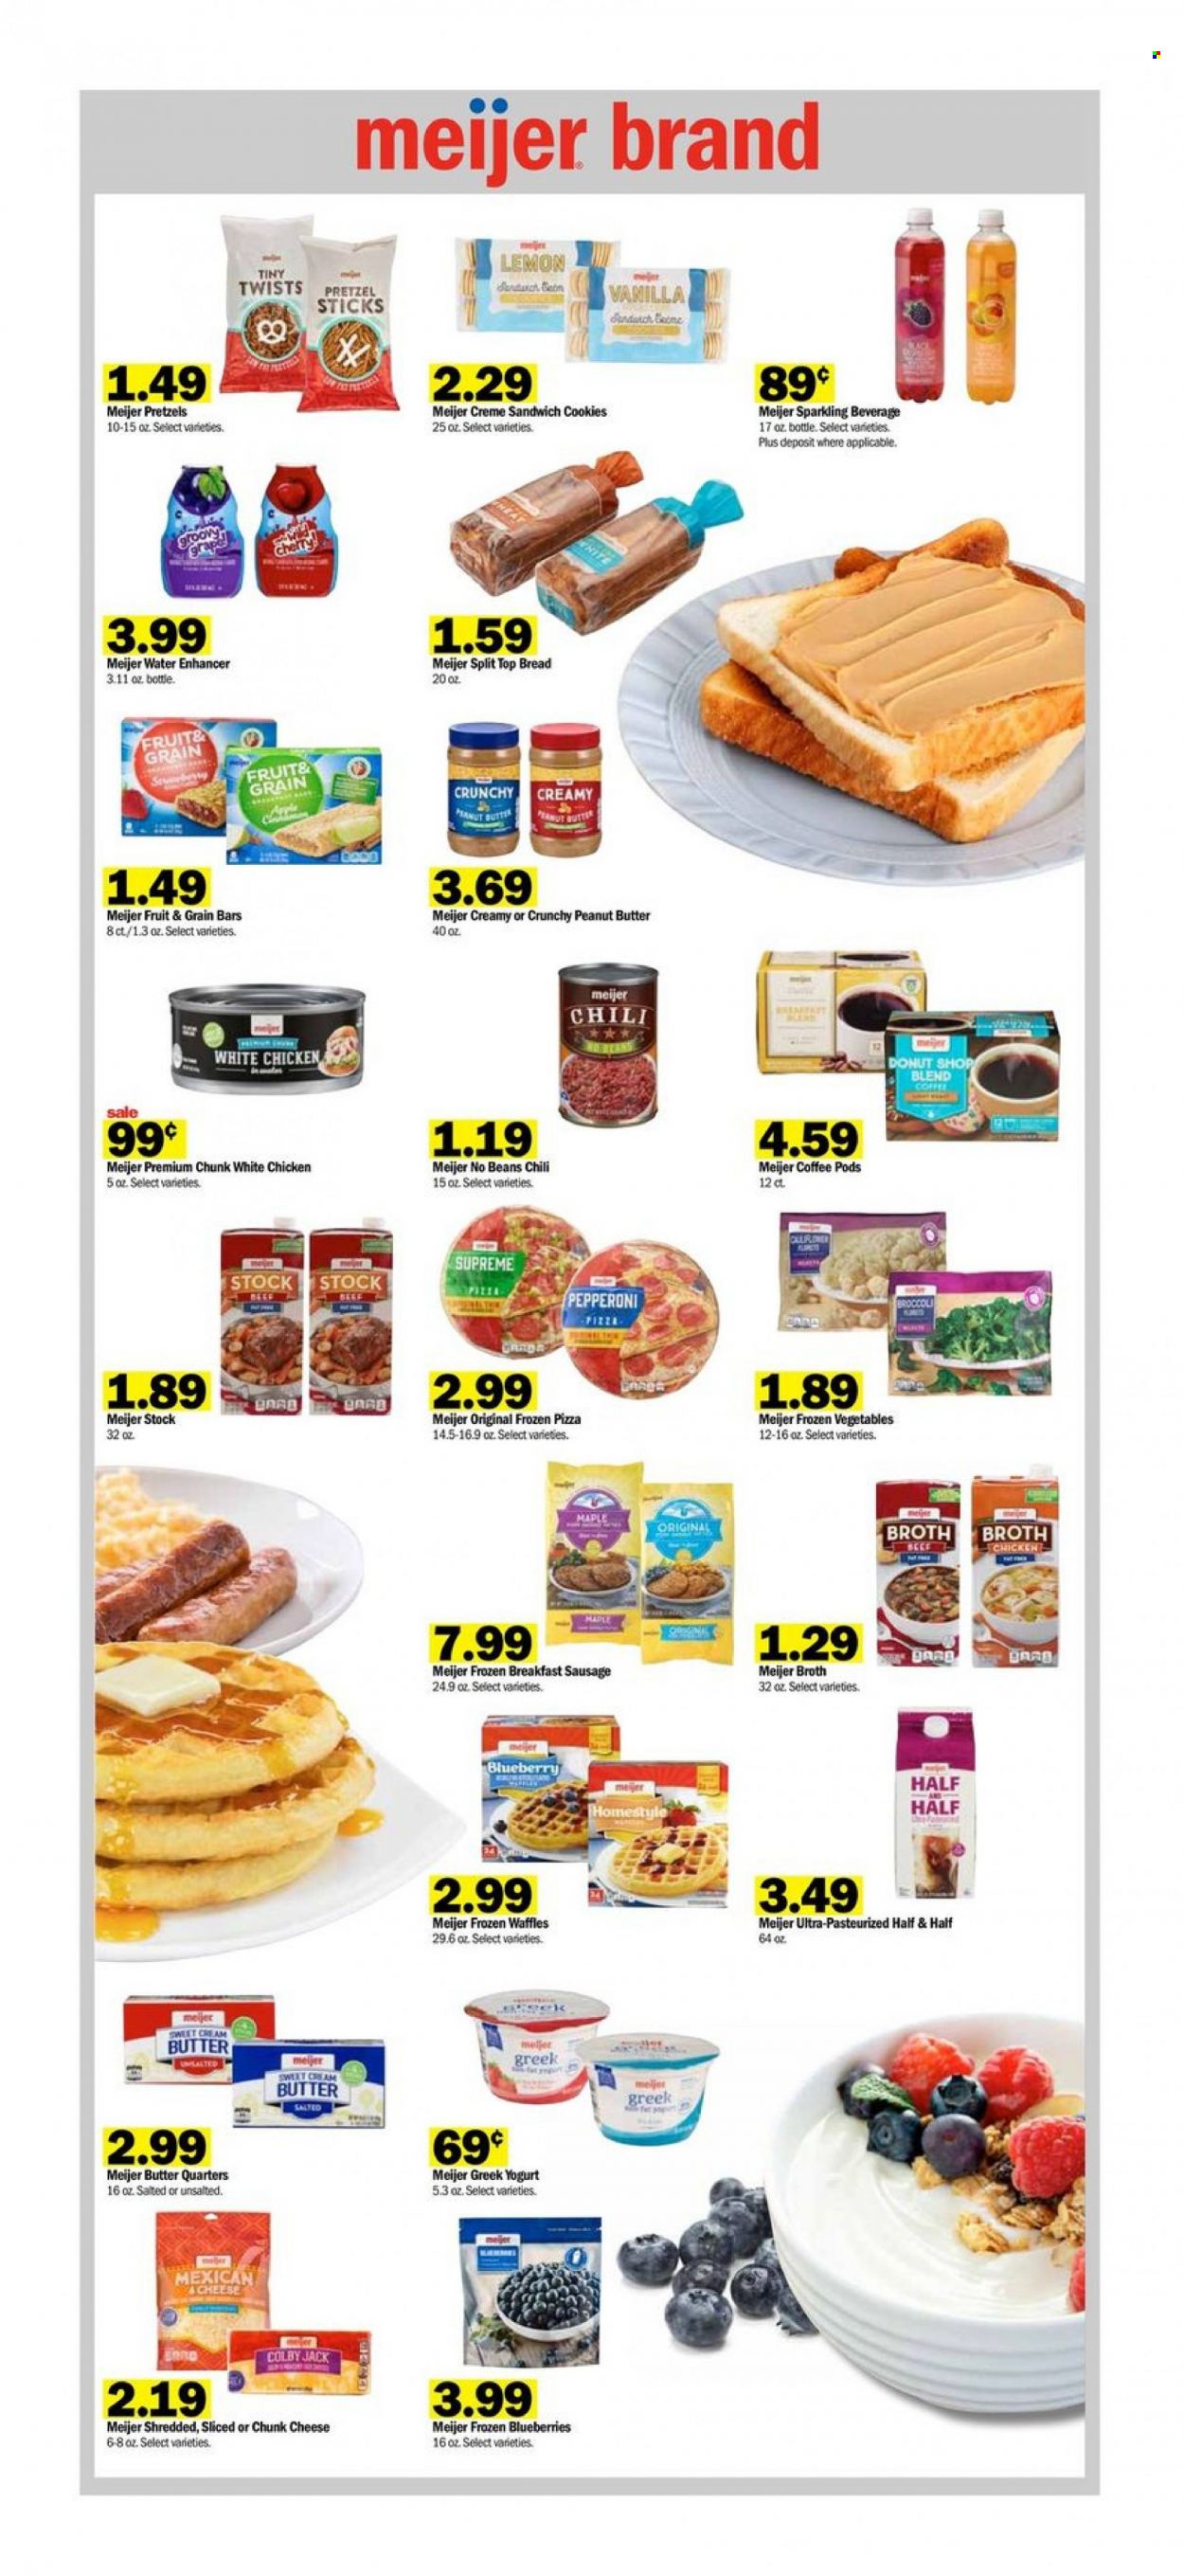 thumbnail - Meijer Flyer - 12/26/2021 - 01/01/2022 - Sales products - bread, pretzels, waffles, broccoli, blueberries, pizza, sausage, Colby cheese, chunk cheese, greek yoghurt, yoghurt, frozen vegetables, cookies, sandwich cookies, broth, peanut butter, coffee pods, bra, Half and half. Page 7.